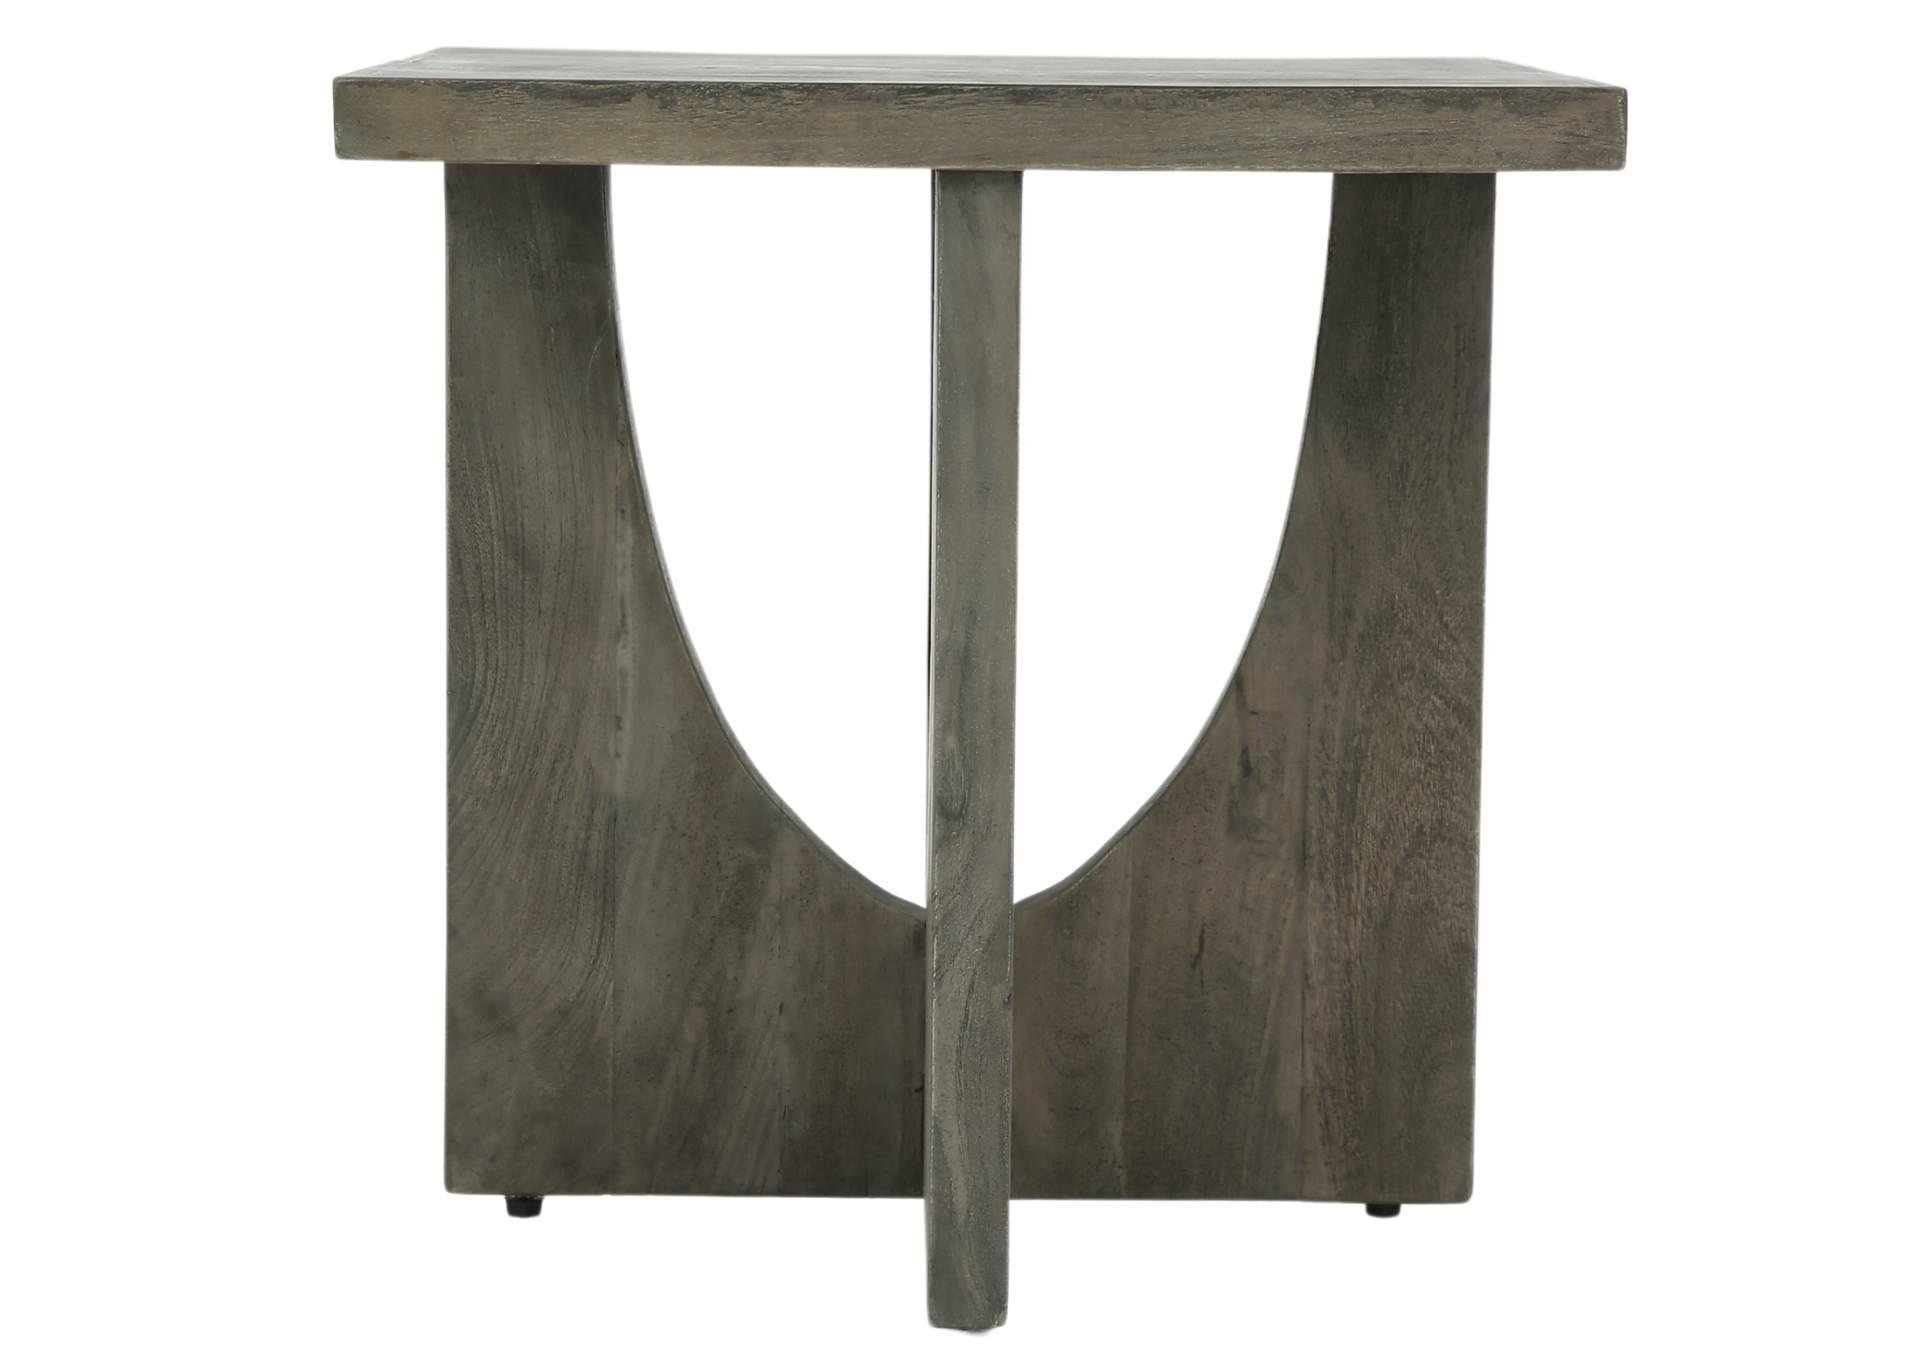 GLENRIDGE END TABLE,CRESTVIEW COLLECTION